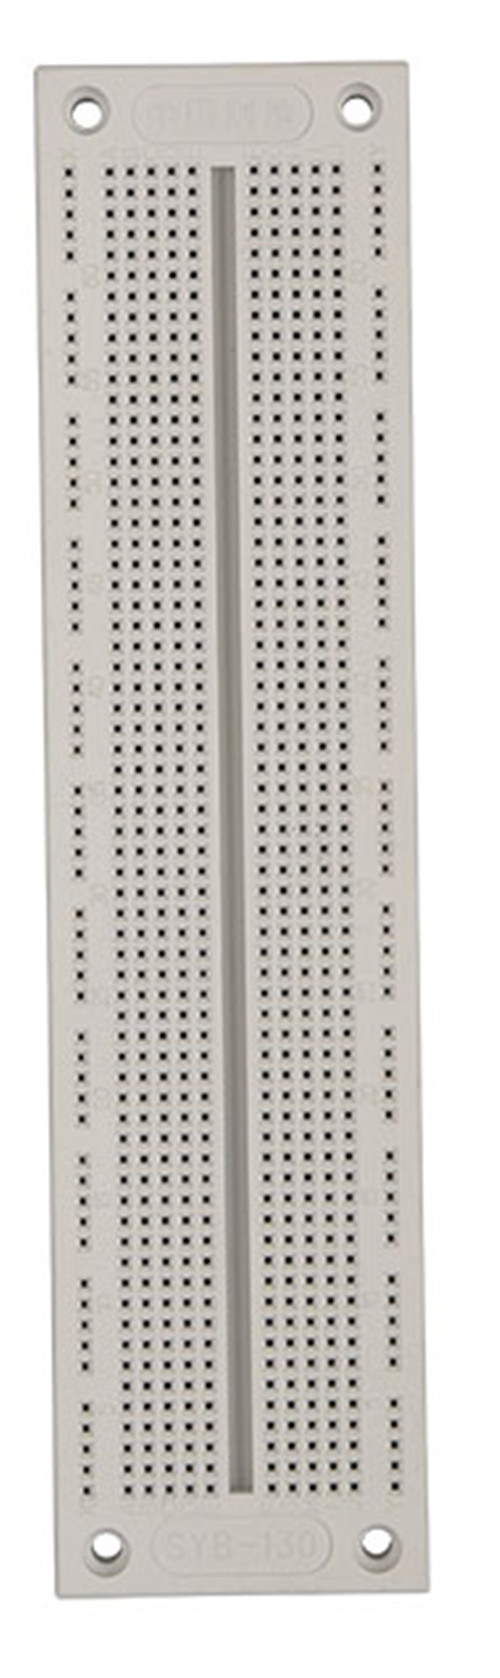 Test Solderless Breadboard with 760 Tie-Ponit (SYB-130)